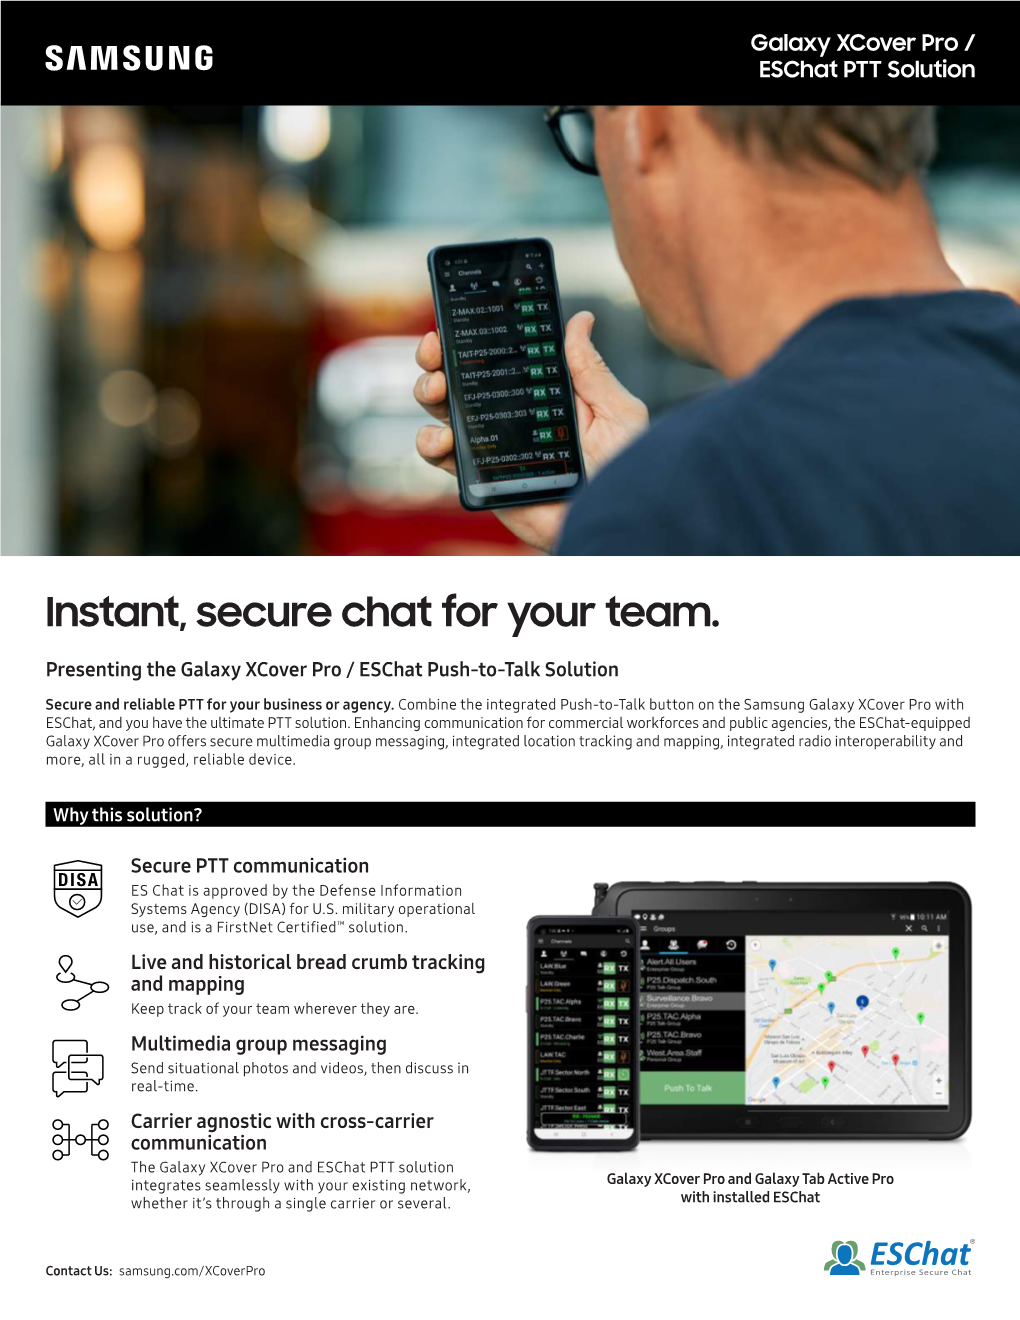 Instant, Secure Chat for Your Team